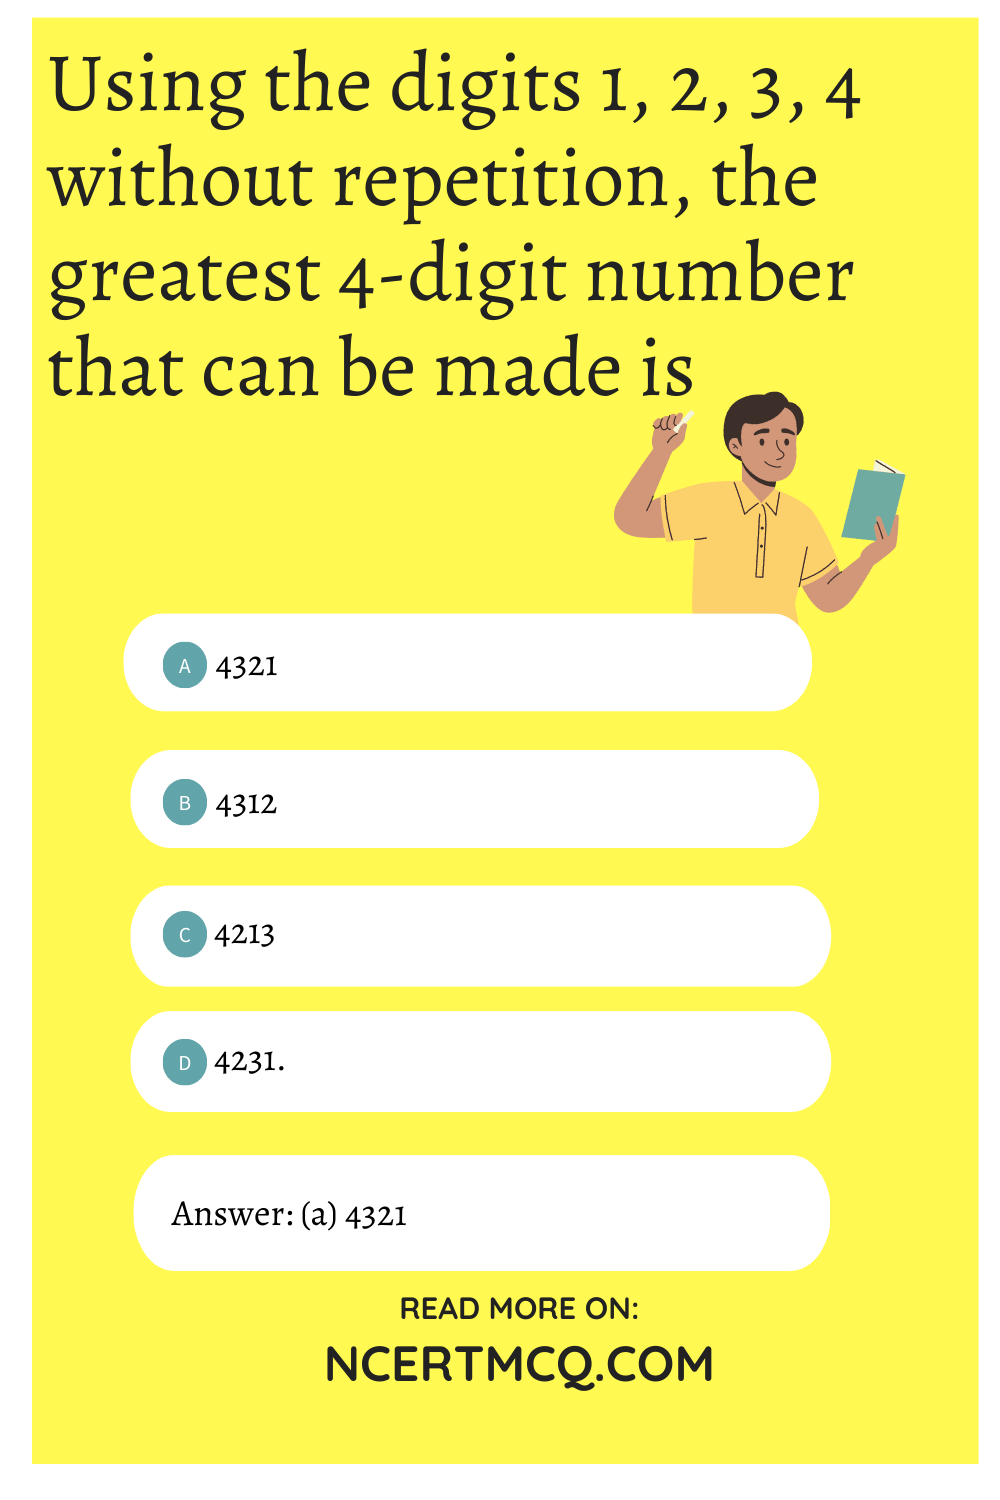 Using the digits 1, 2, 3, 4 without repetition, the greatest 4-digit number that can be made is